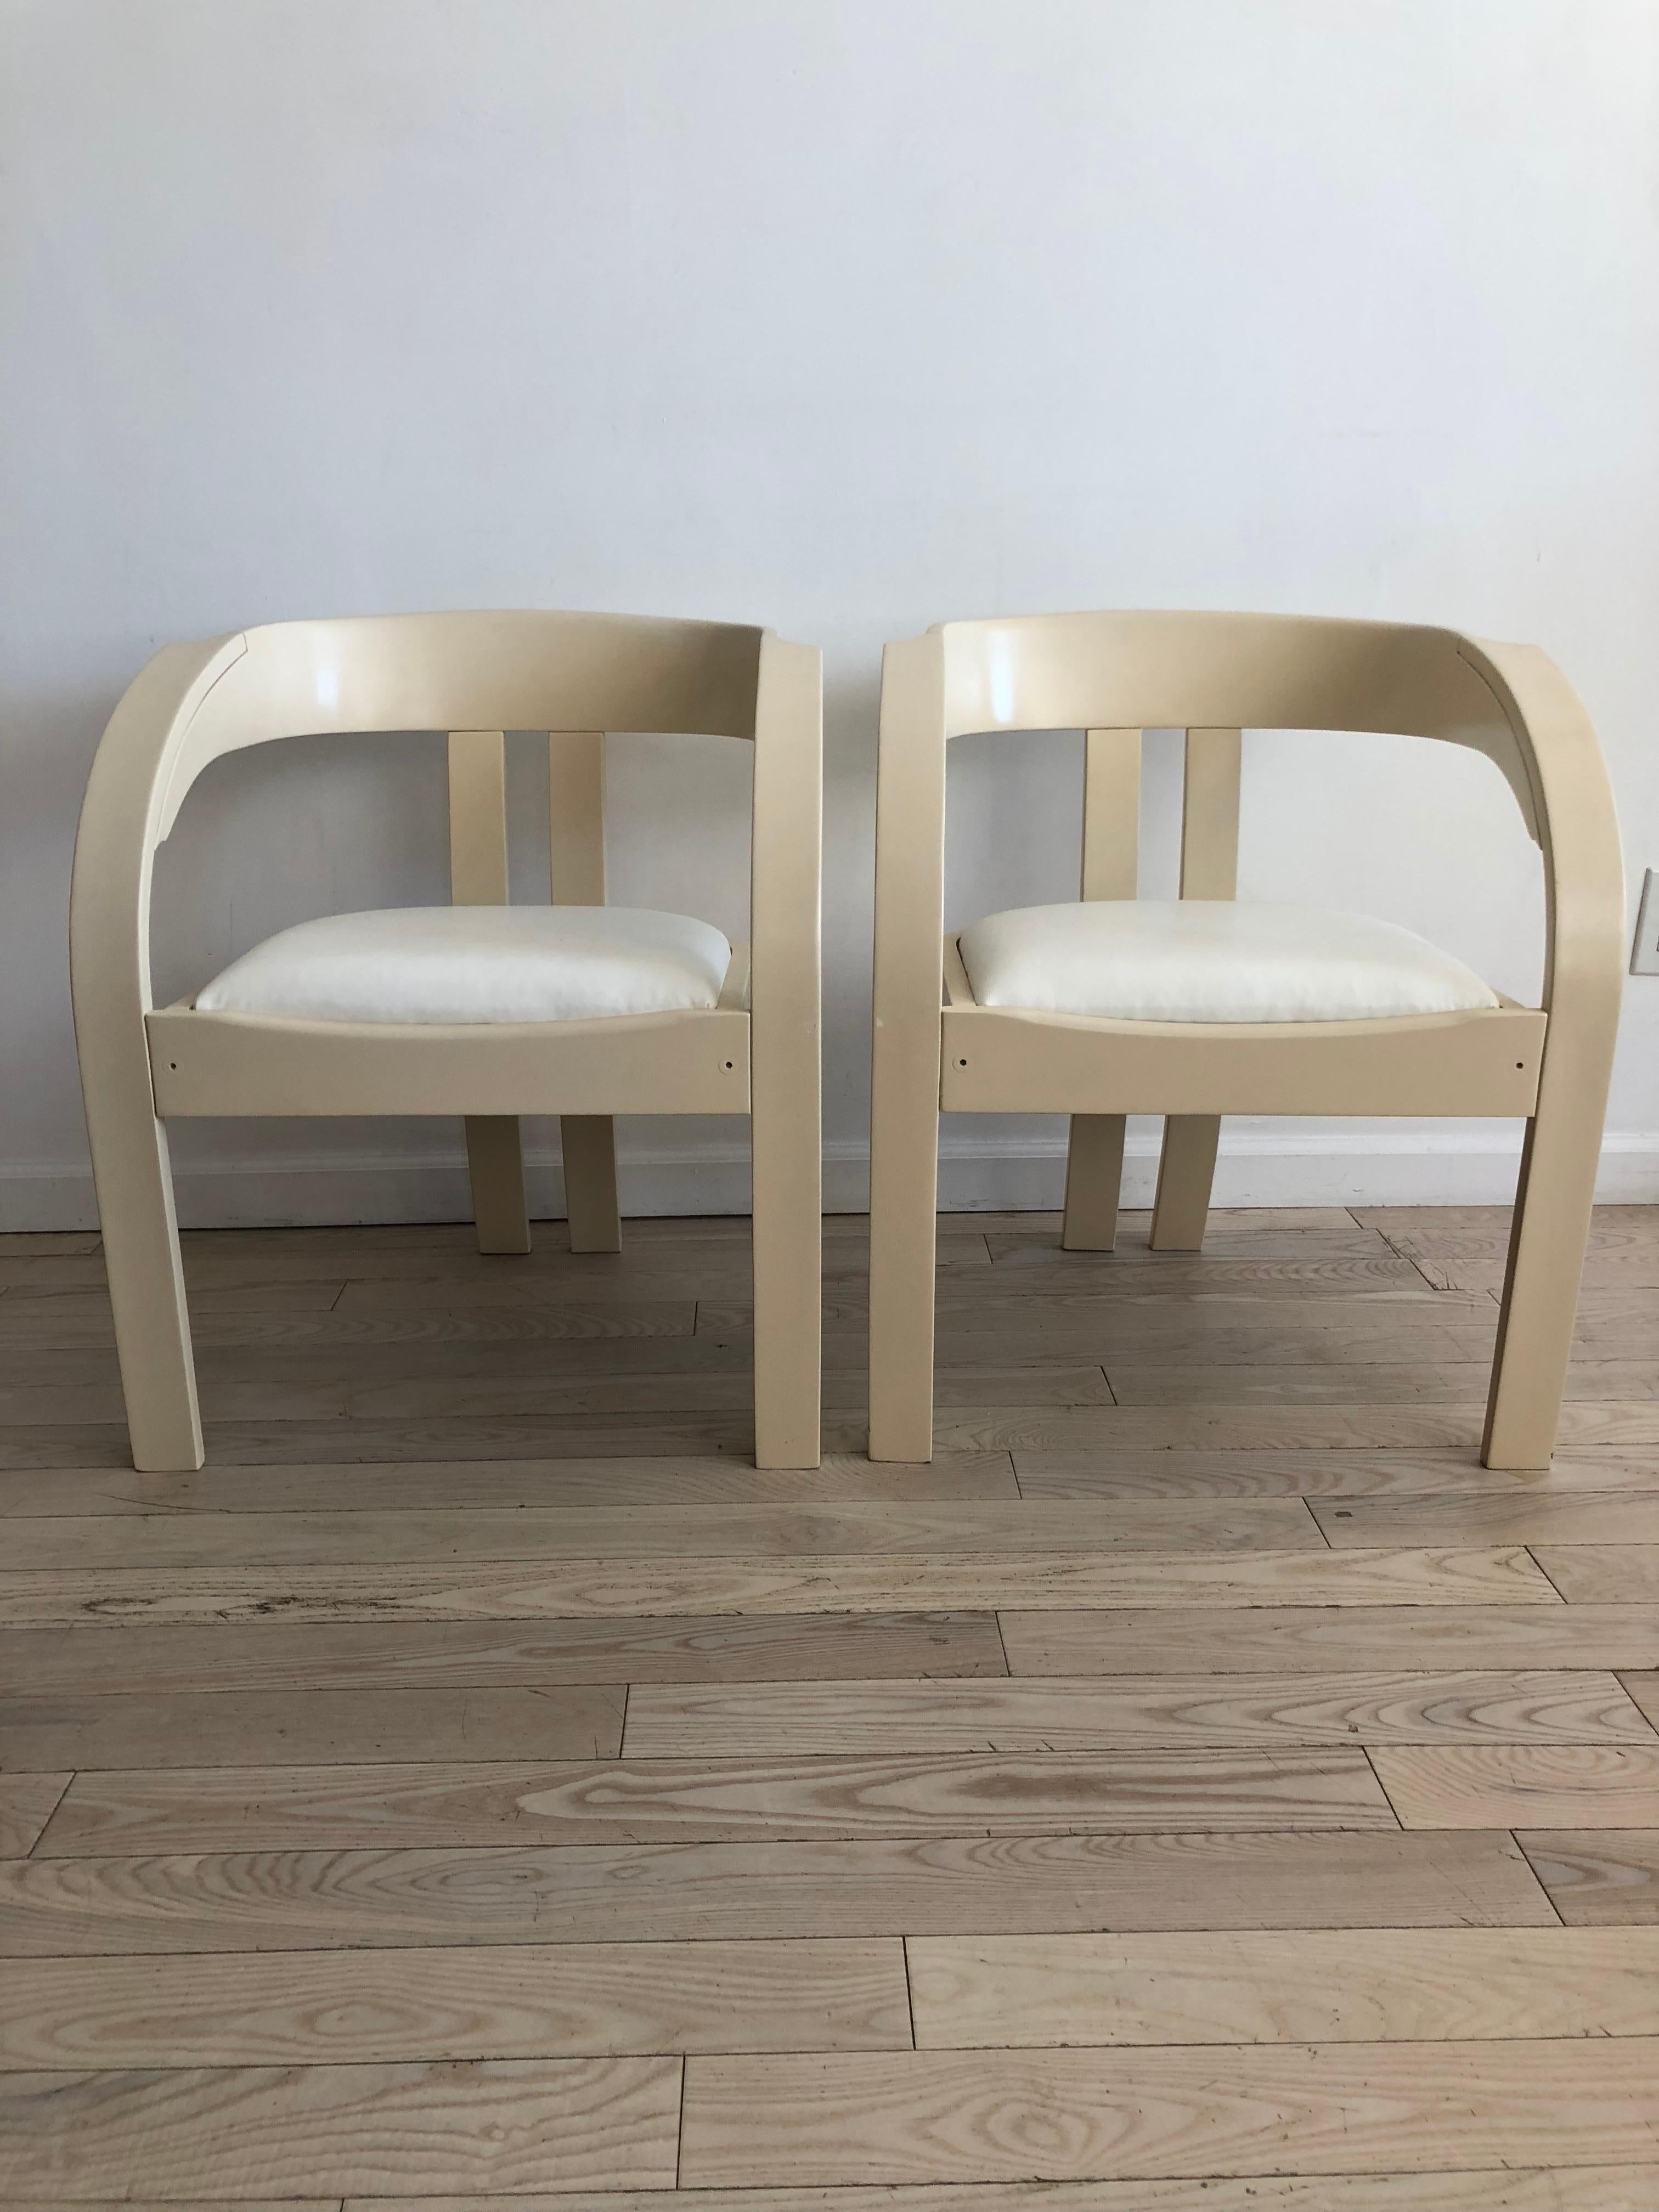 Italian Elisa Chairs by Giovanni Bassi for Poltronova, Pair of Cream and White Chairs